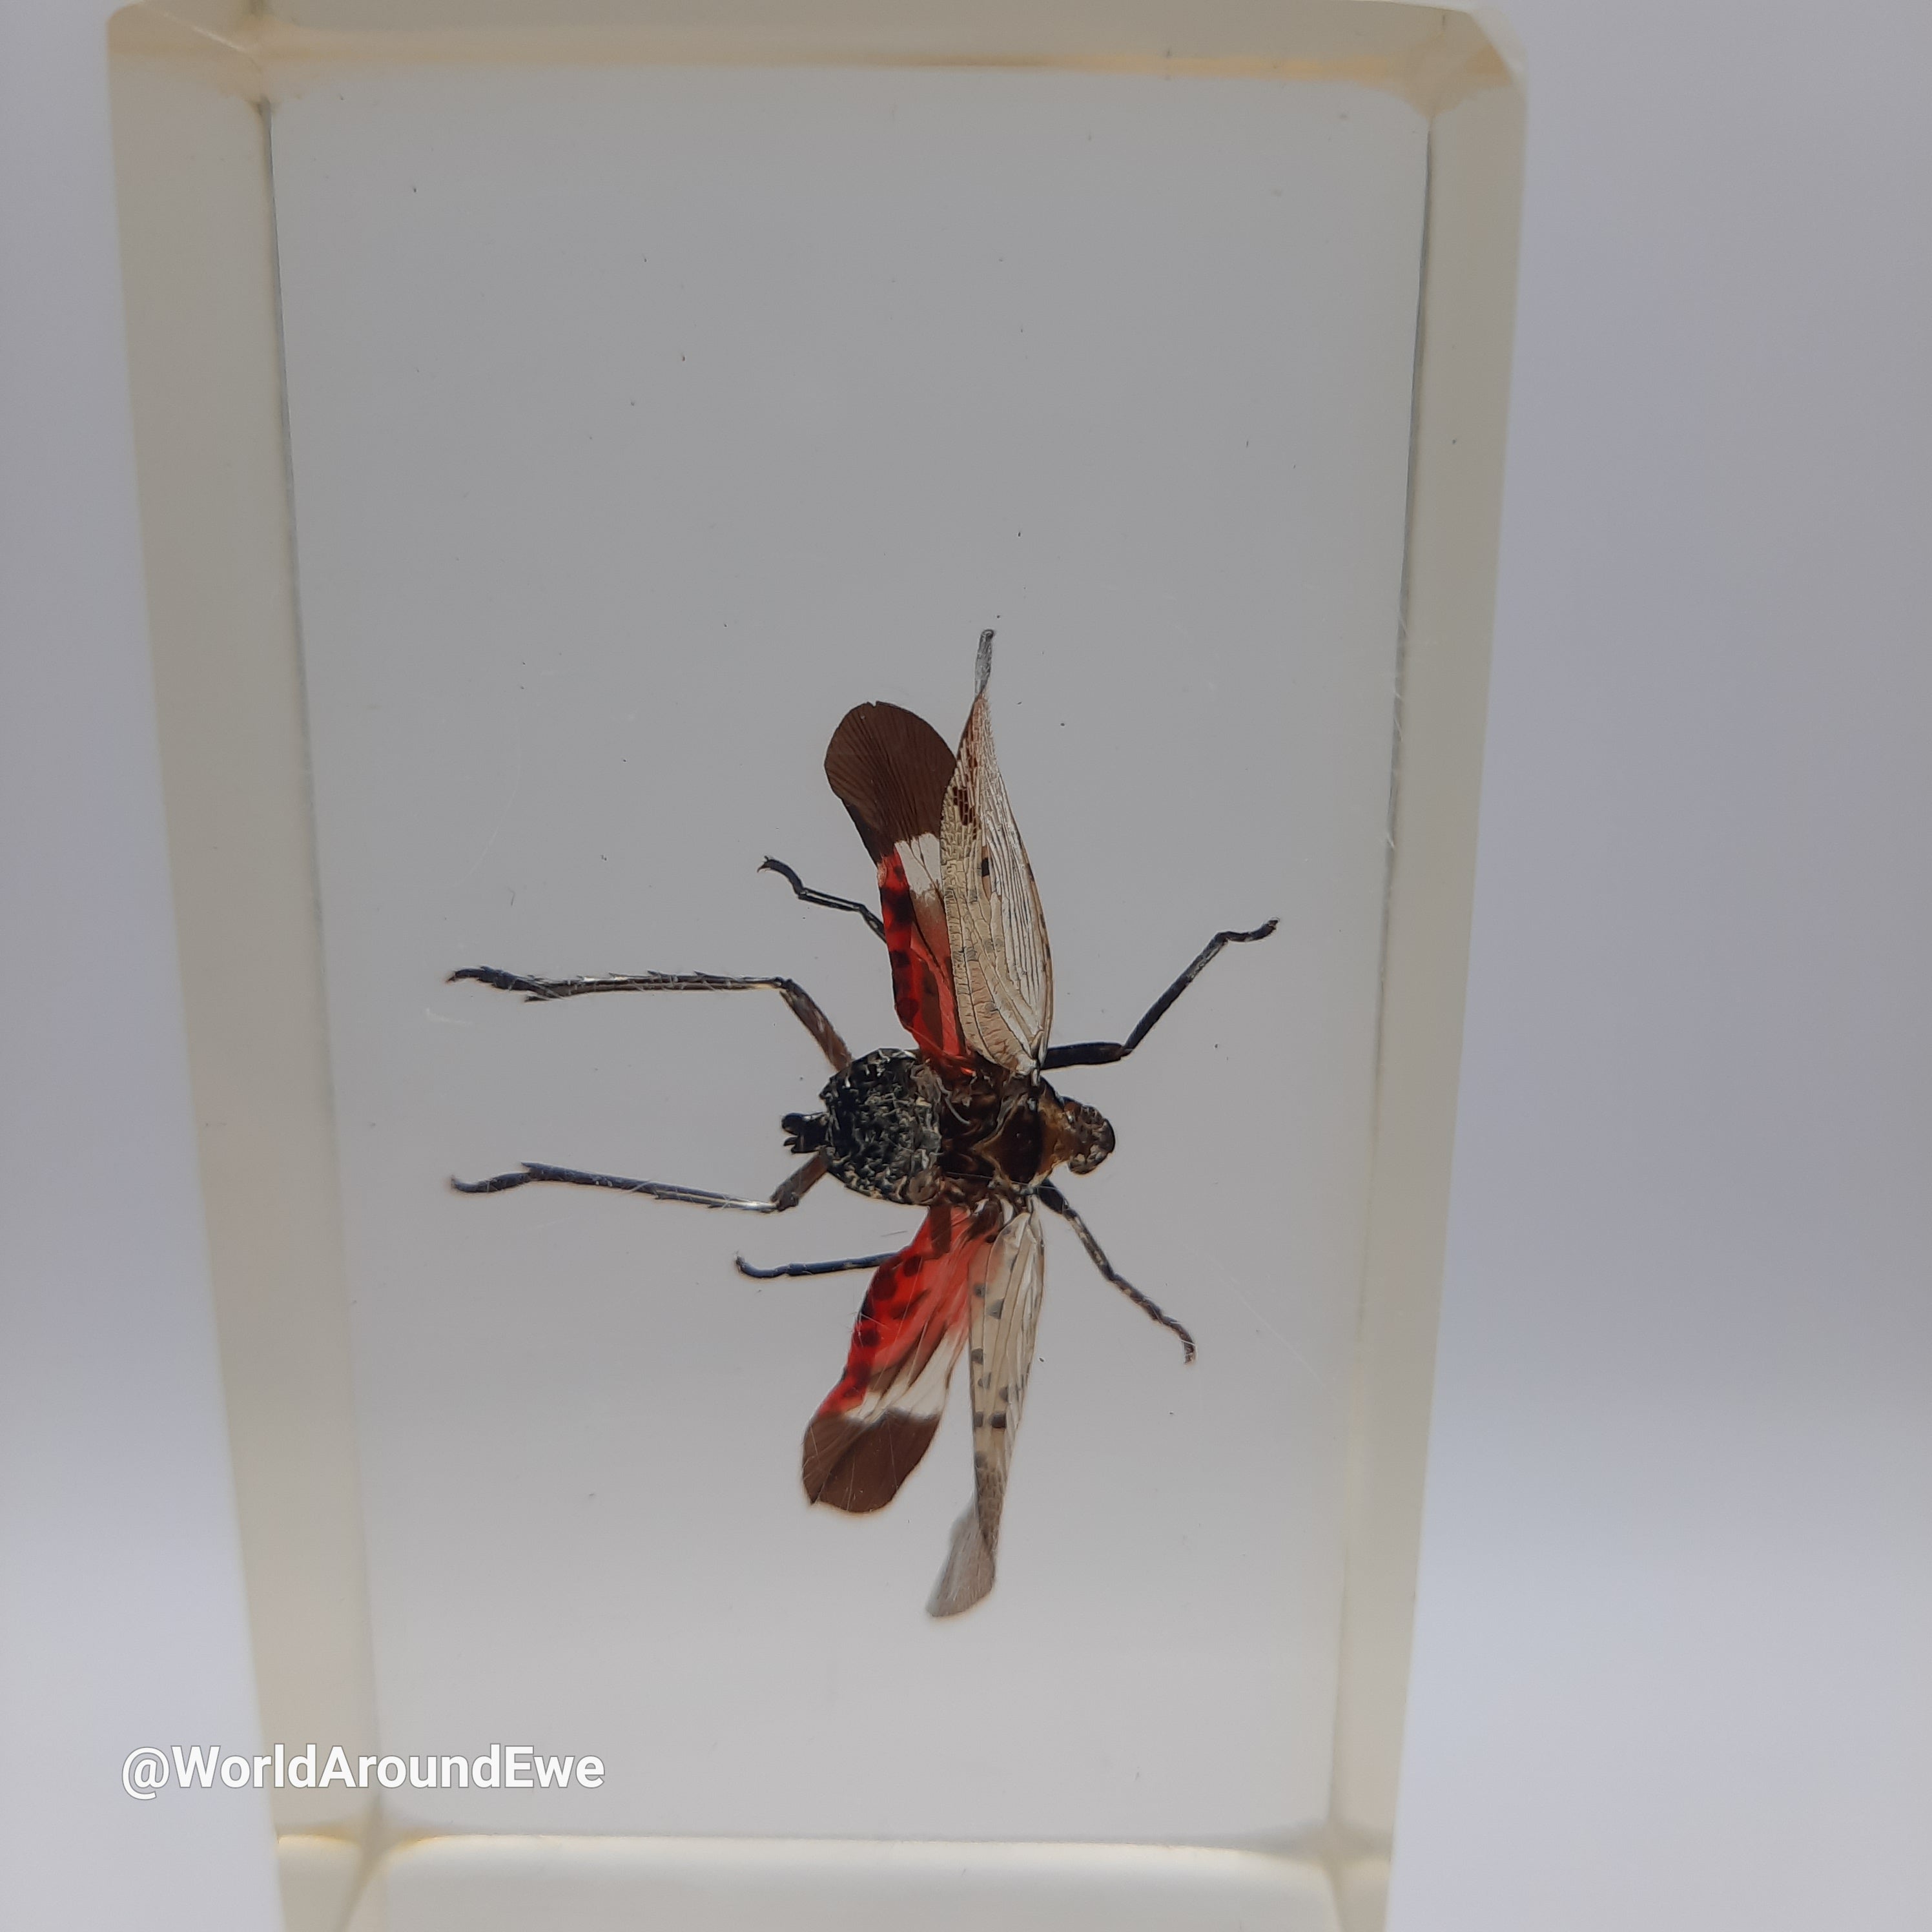 Insect specimens